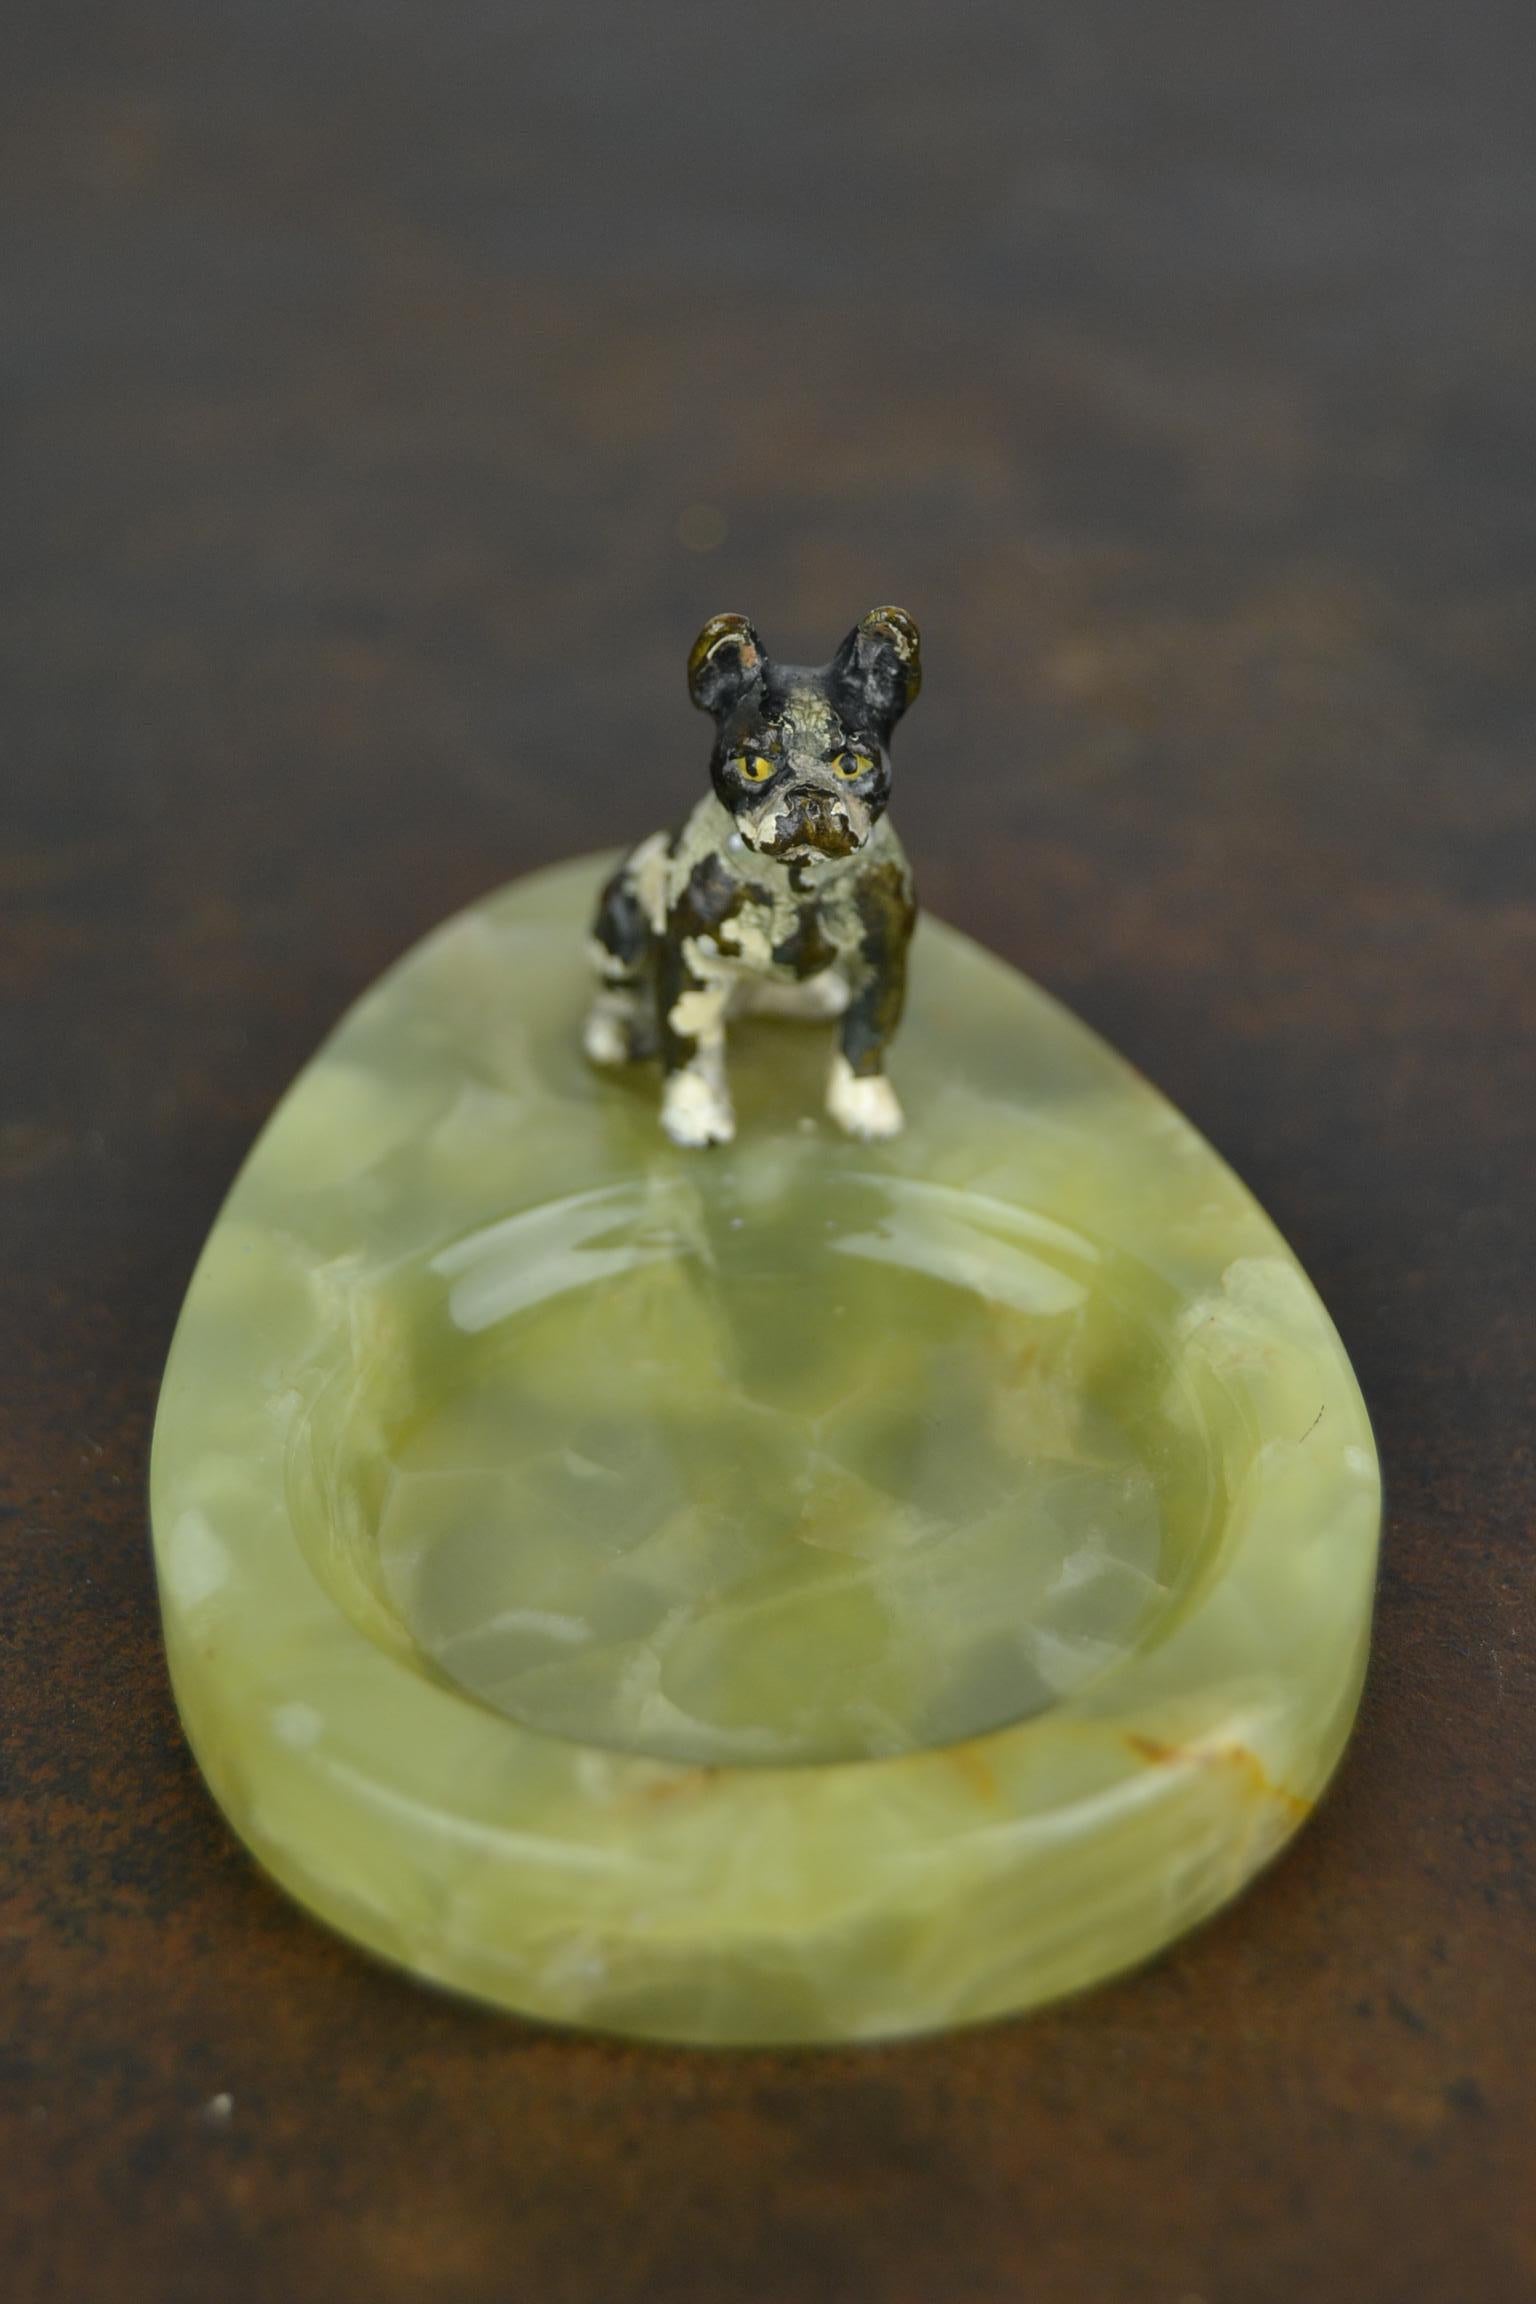 Stylish Art Deco Green Onyx Stone Ashtray with a little Bronze Cold-Painted French Bulldog Figurine - Bulldog Statue - Frenchie .
Great Antique Desk Ornament from the 1920s.
Paper weight - Desk Accessories - Animal Dog Figurine - Frenchie Gift 

The